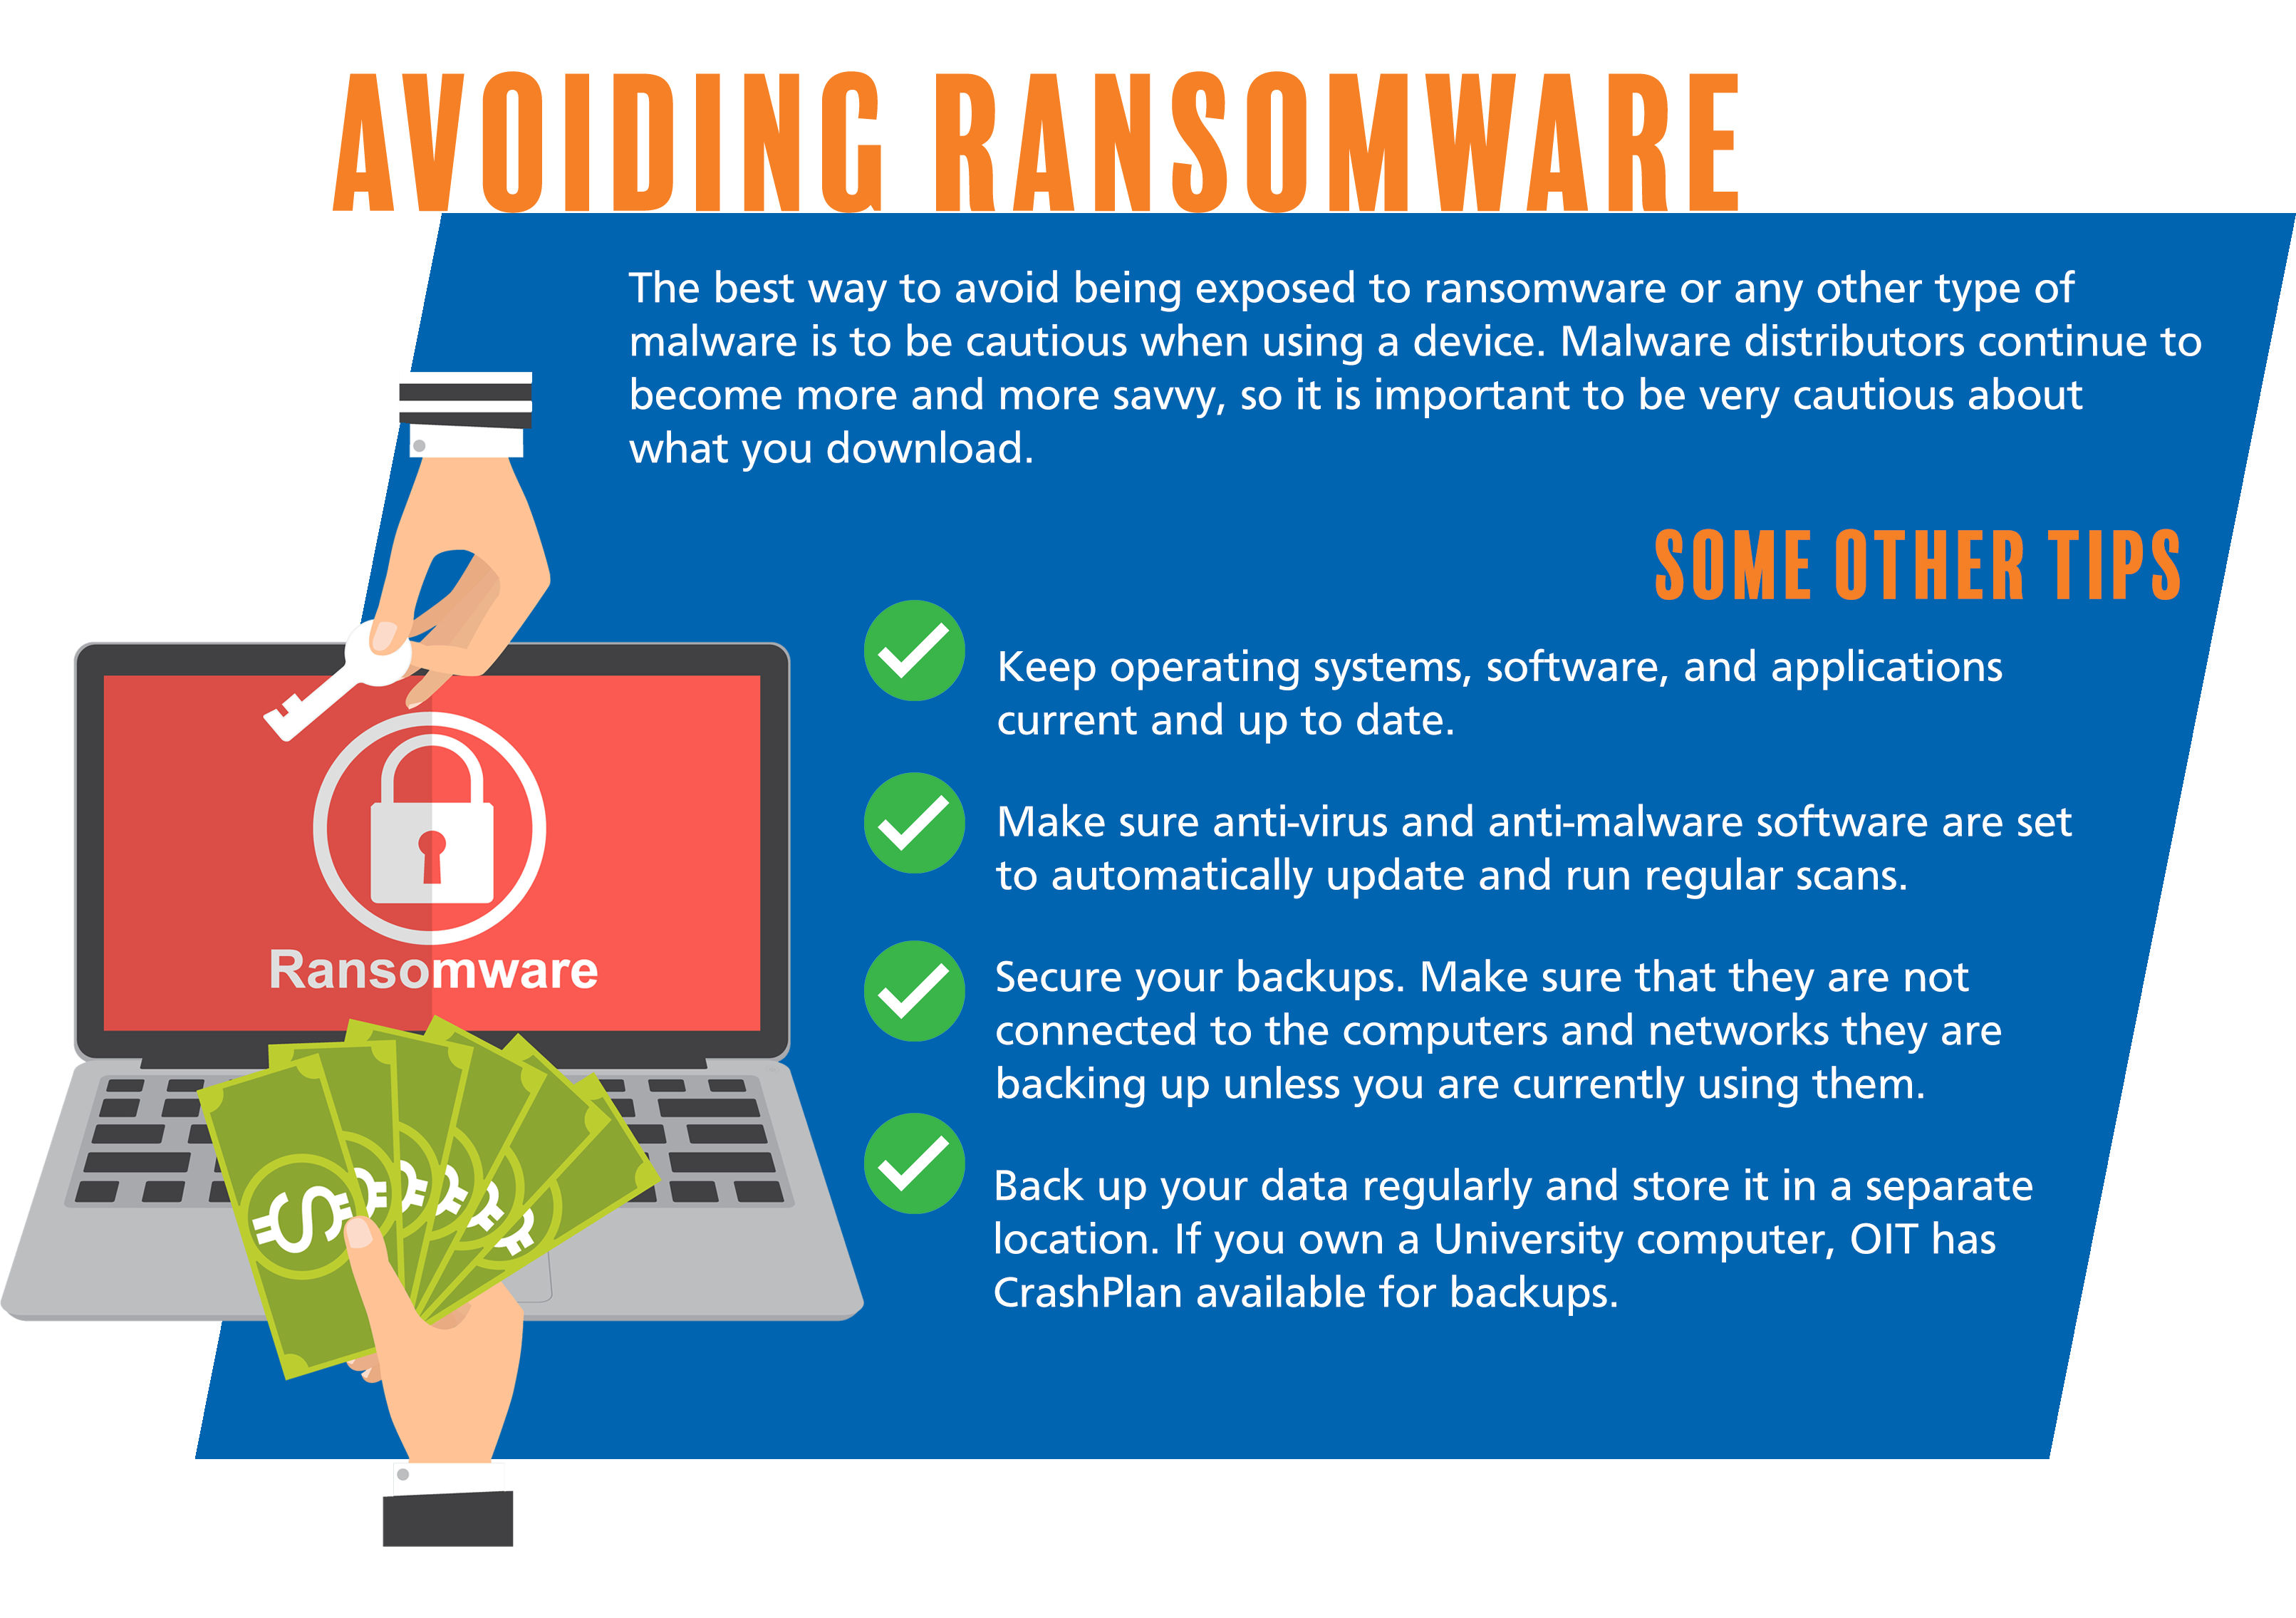 WEBSITE-ransomwaregraphic-REVISED01.png